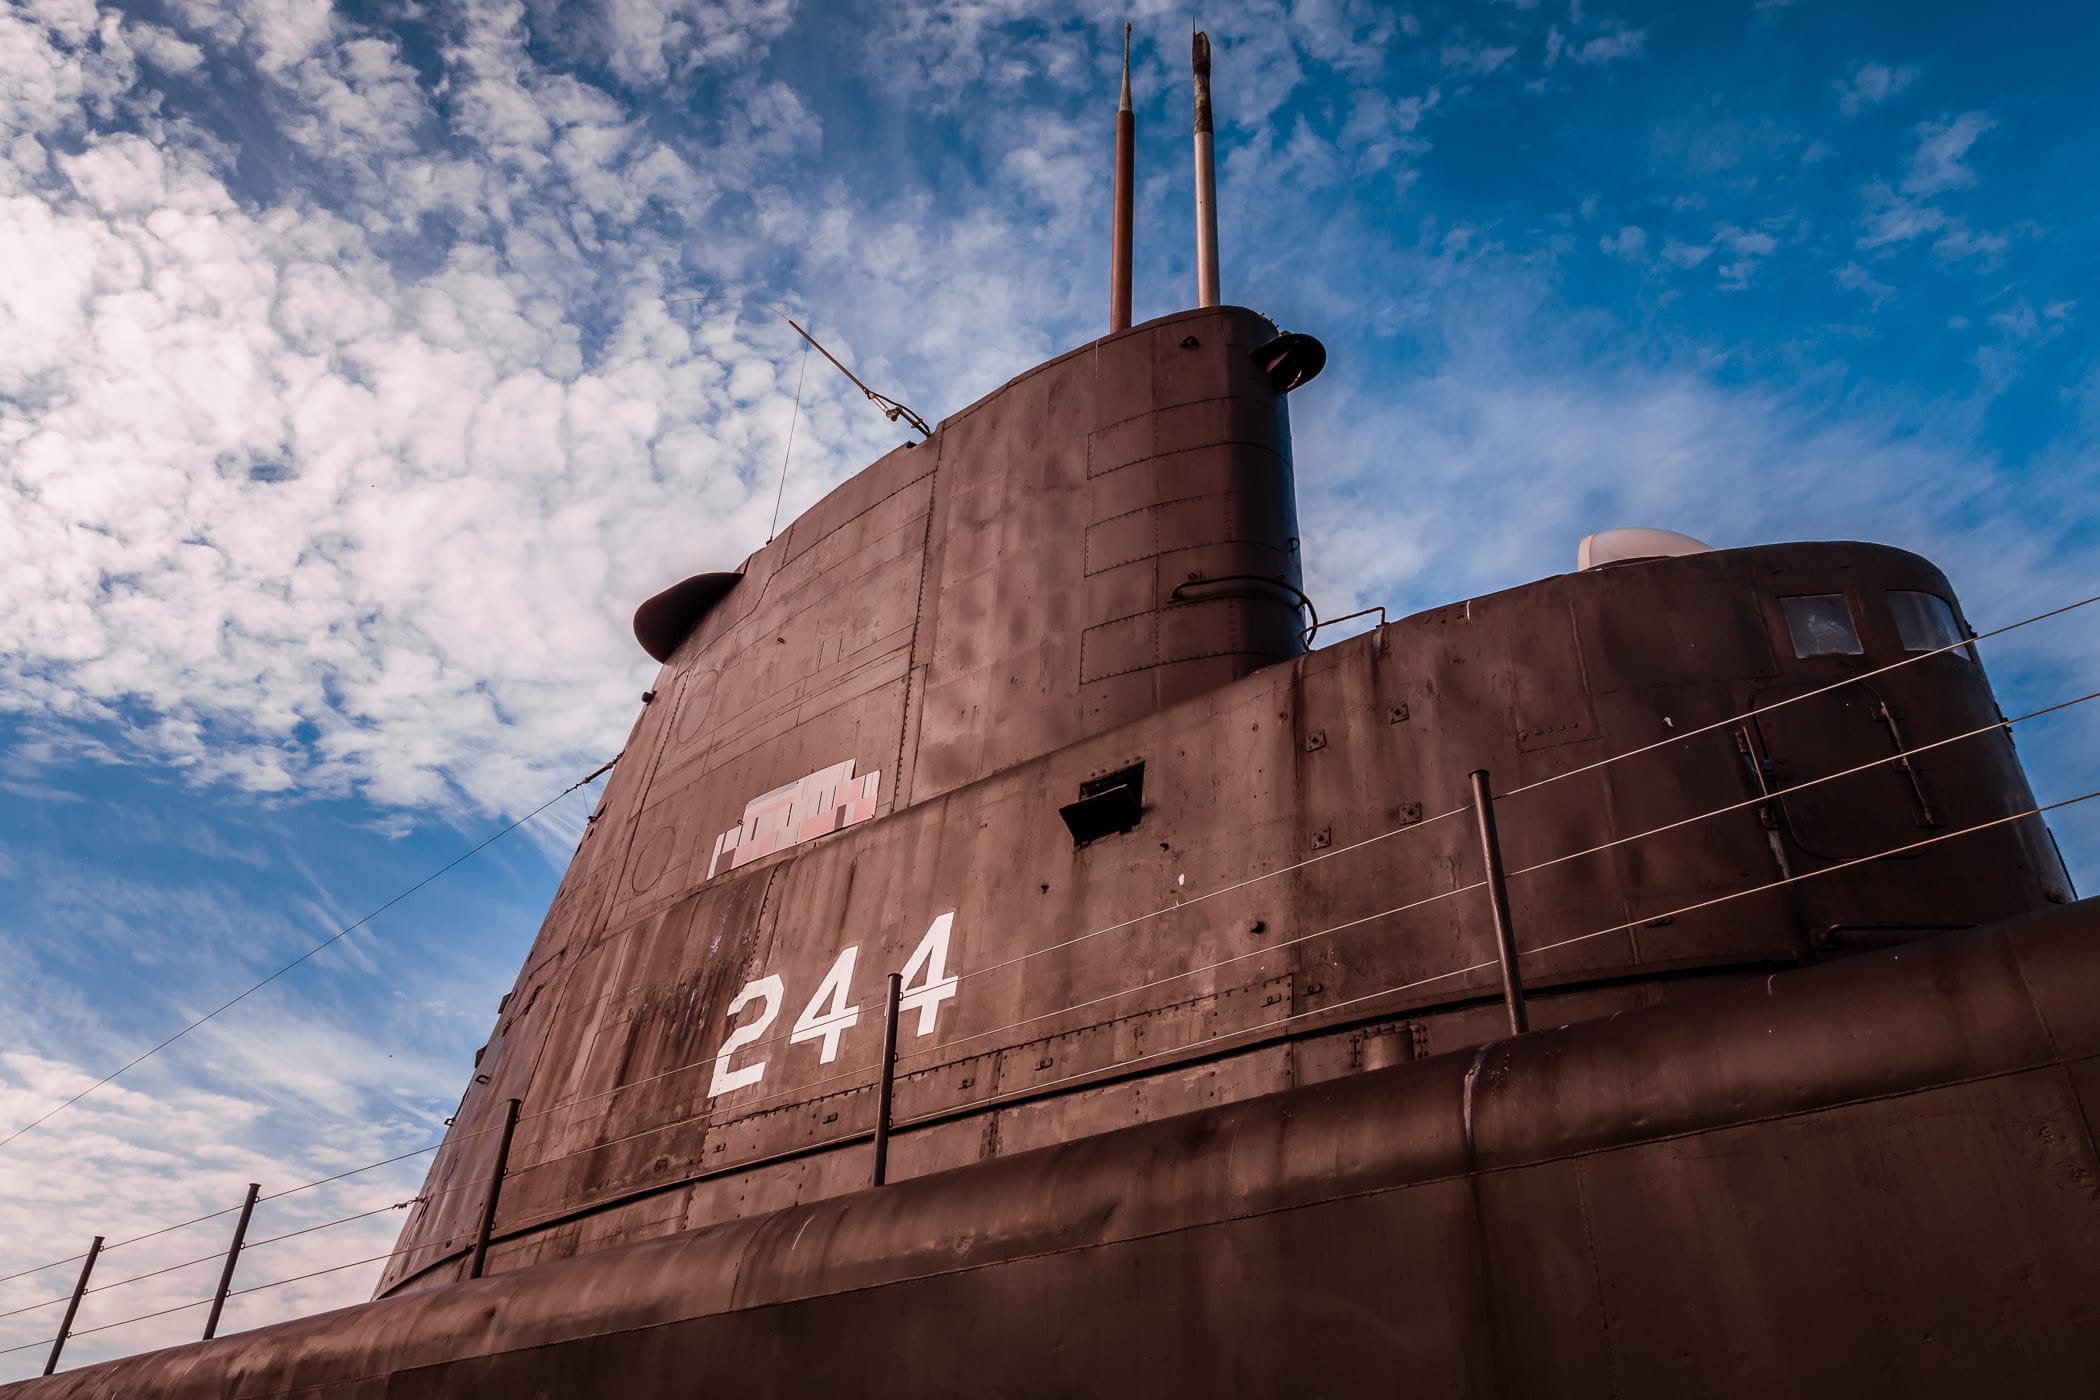 The sail (or conning tower) of the Gato-class submarine USS Cavalla rises into the late afternoon sky over Galveston, Texas' Seawolf Park.